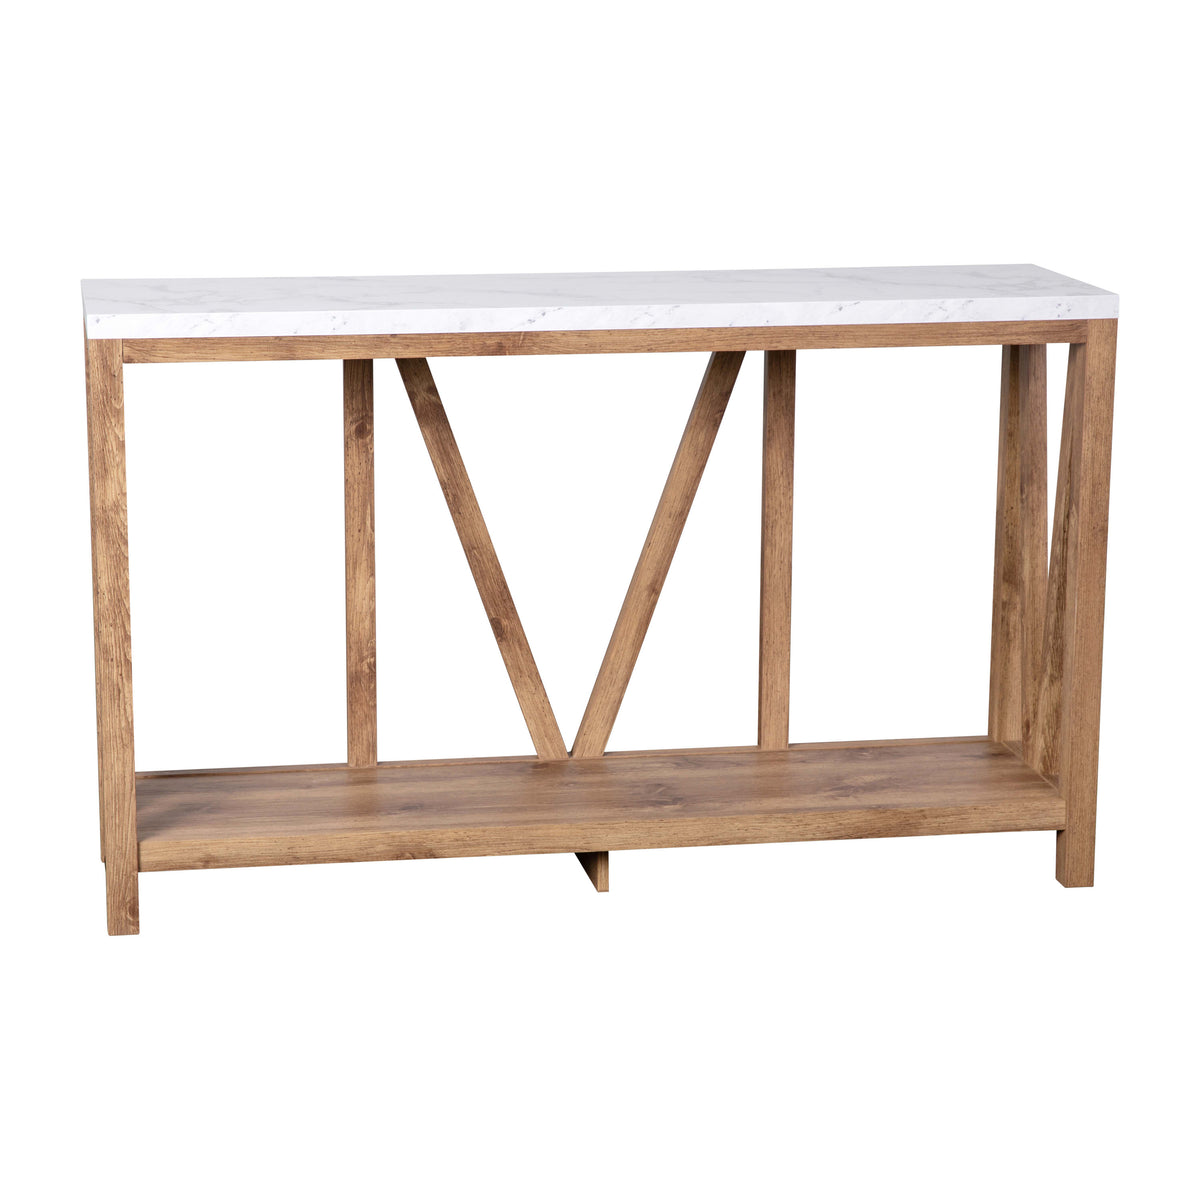 Marble Top/Warm Oak Frame |#| Farmhouse Style Rustic Entryway Console Table - Warm Oak/Marble Finish Top